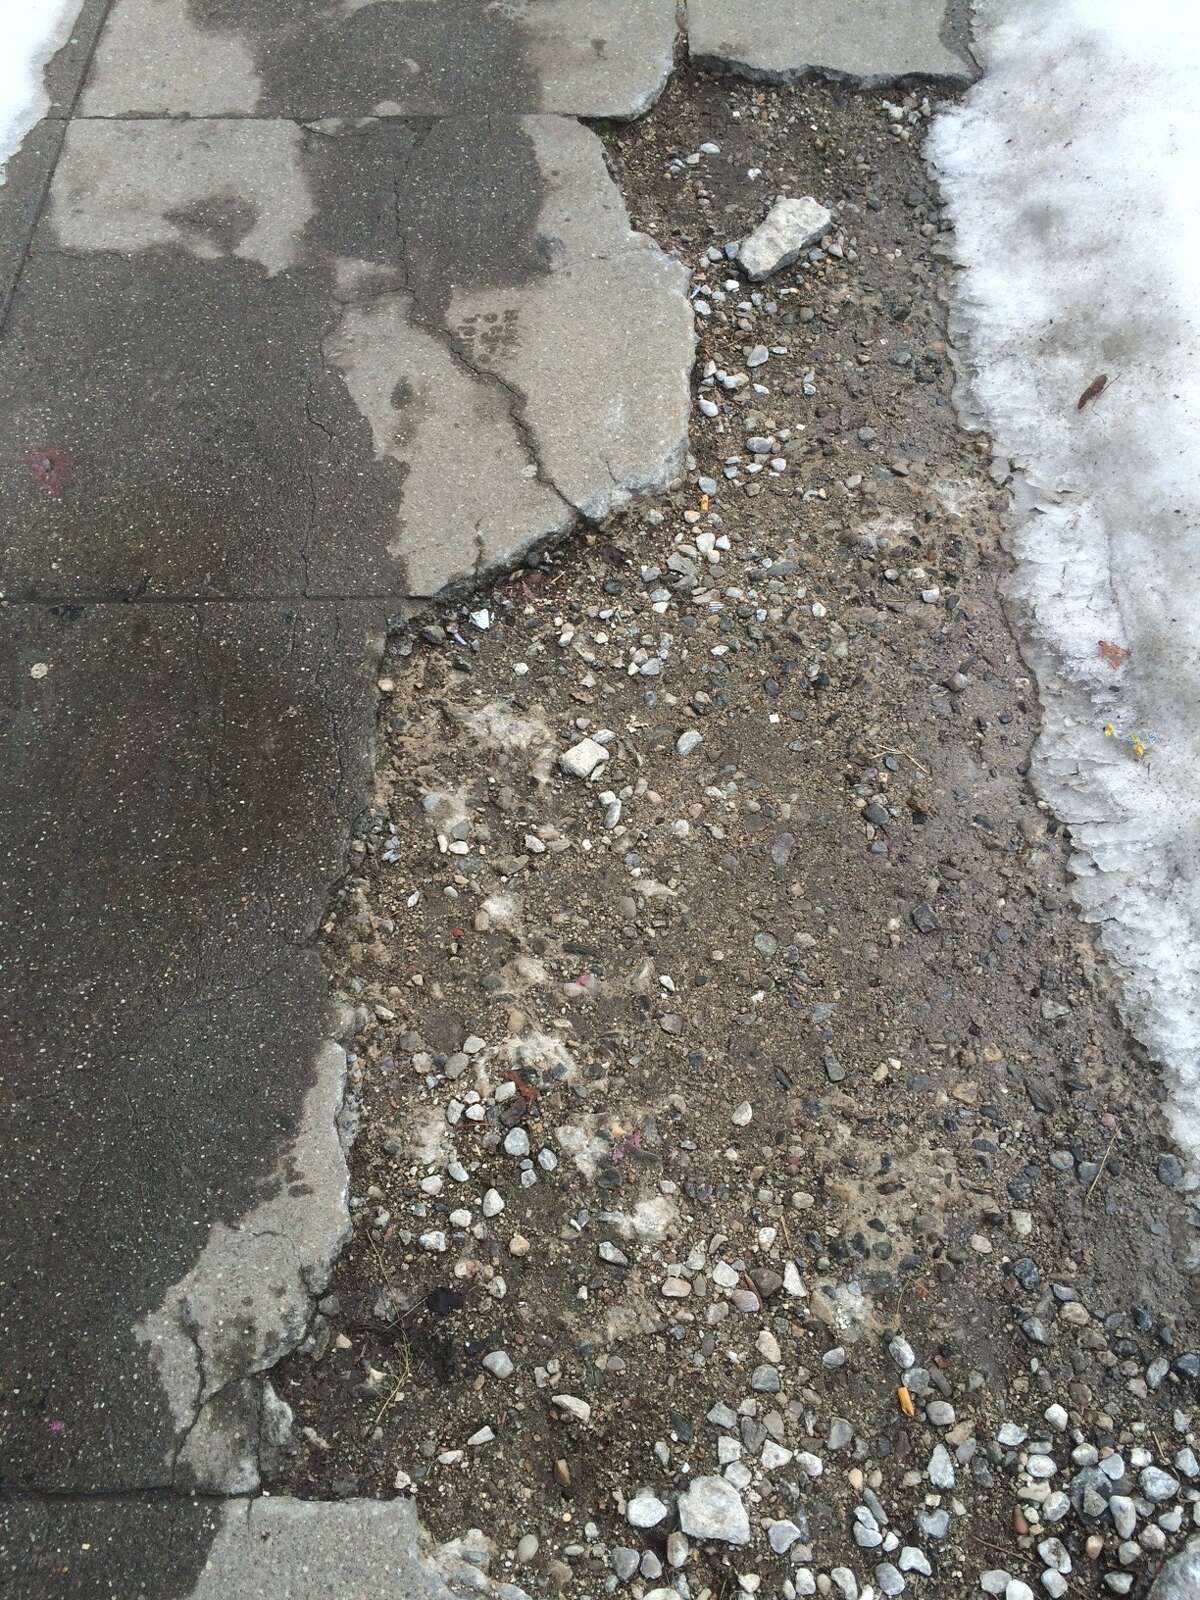 A section of cracked and damaged sidewalk along Main Street in in Bridgeport on Friday.